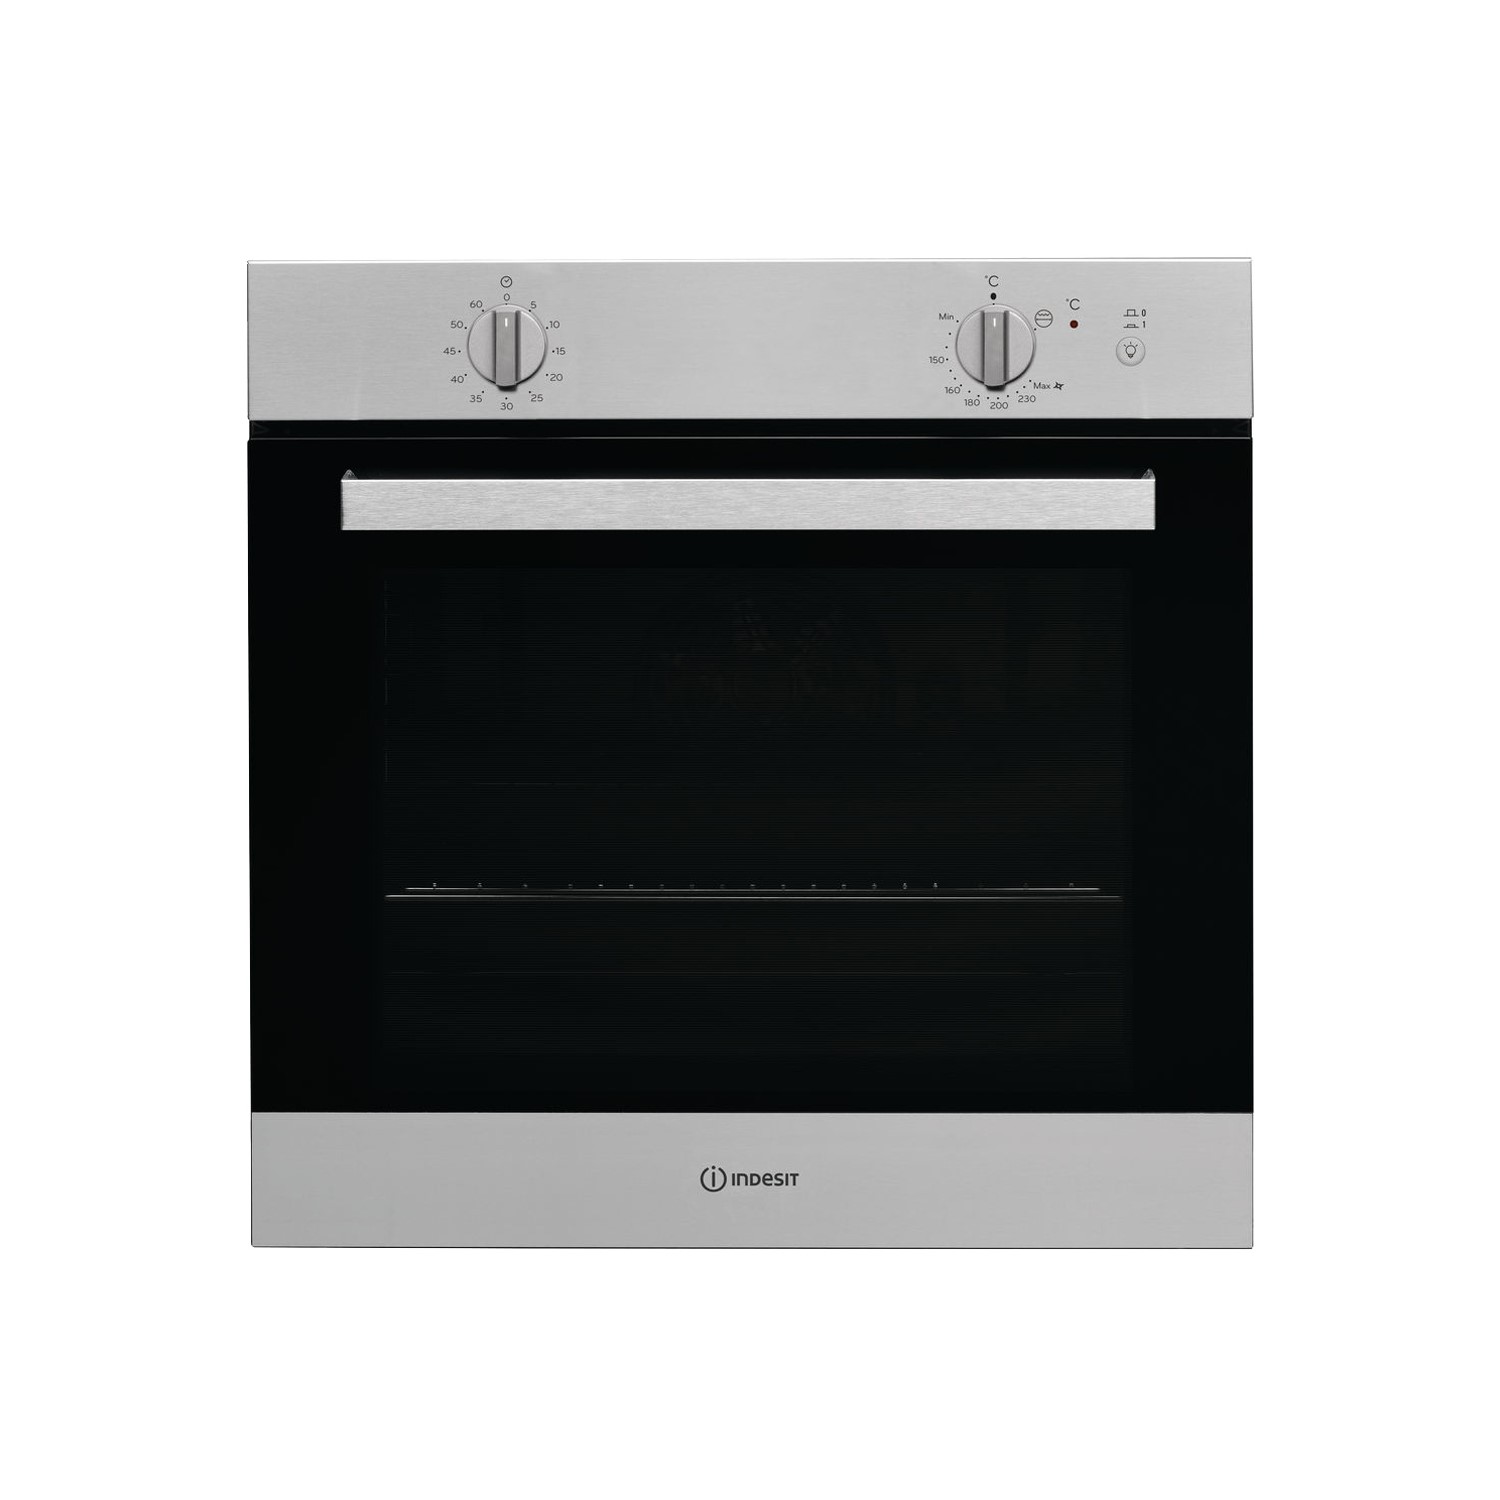 Refurbished Indesit IGW620IXUK 60cm Single Built In Gas Oven Stainless Steel